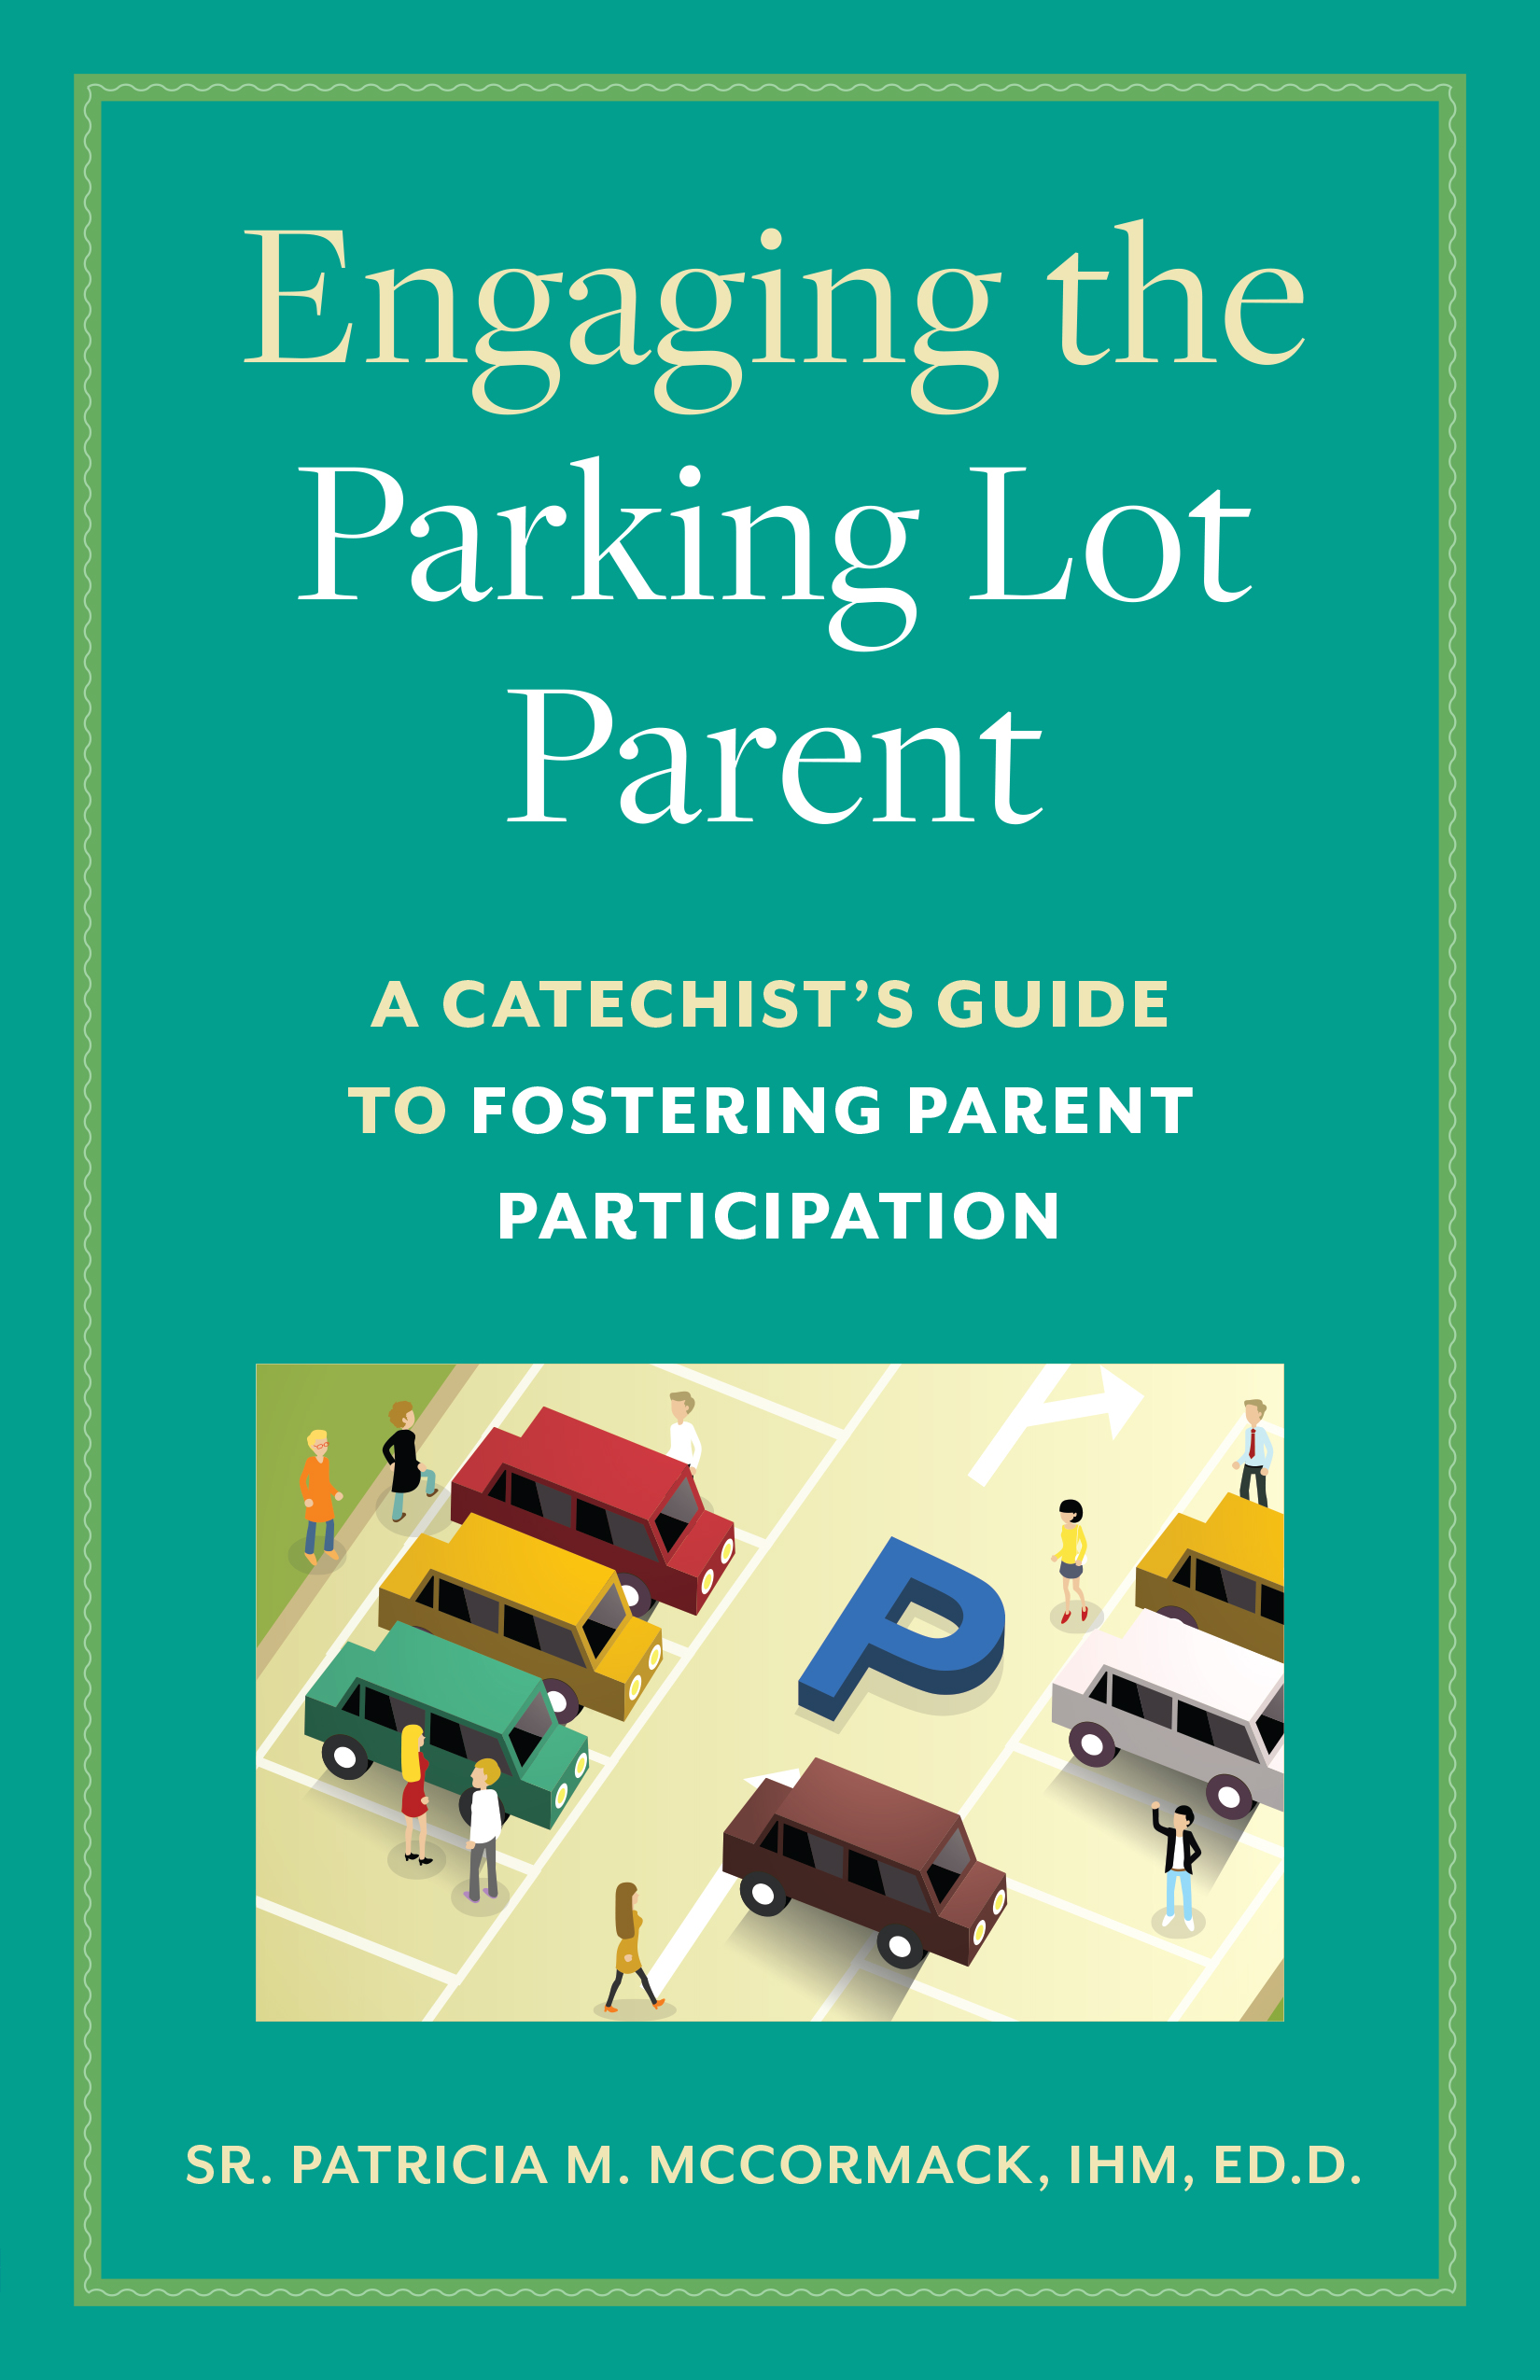 An Excerpt from Engaging the Parking Lot Parent by Sr Patricia McCormack - CATECHIST Magazine